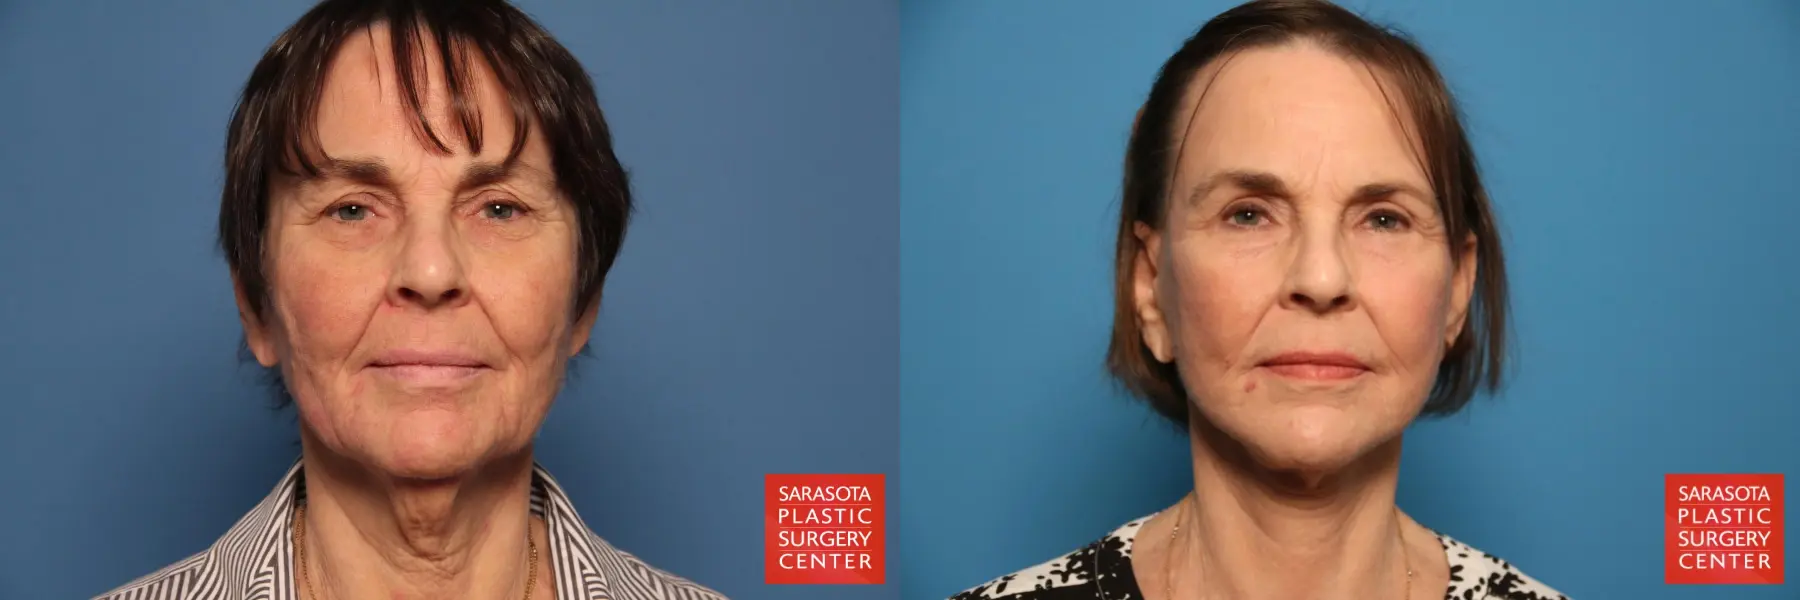 Facelift: Patient 60 - Before and After 1